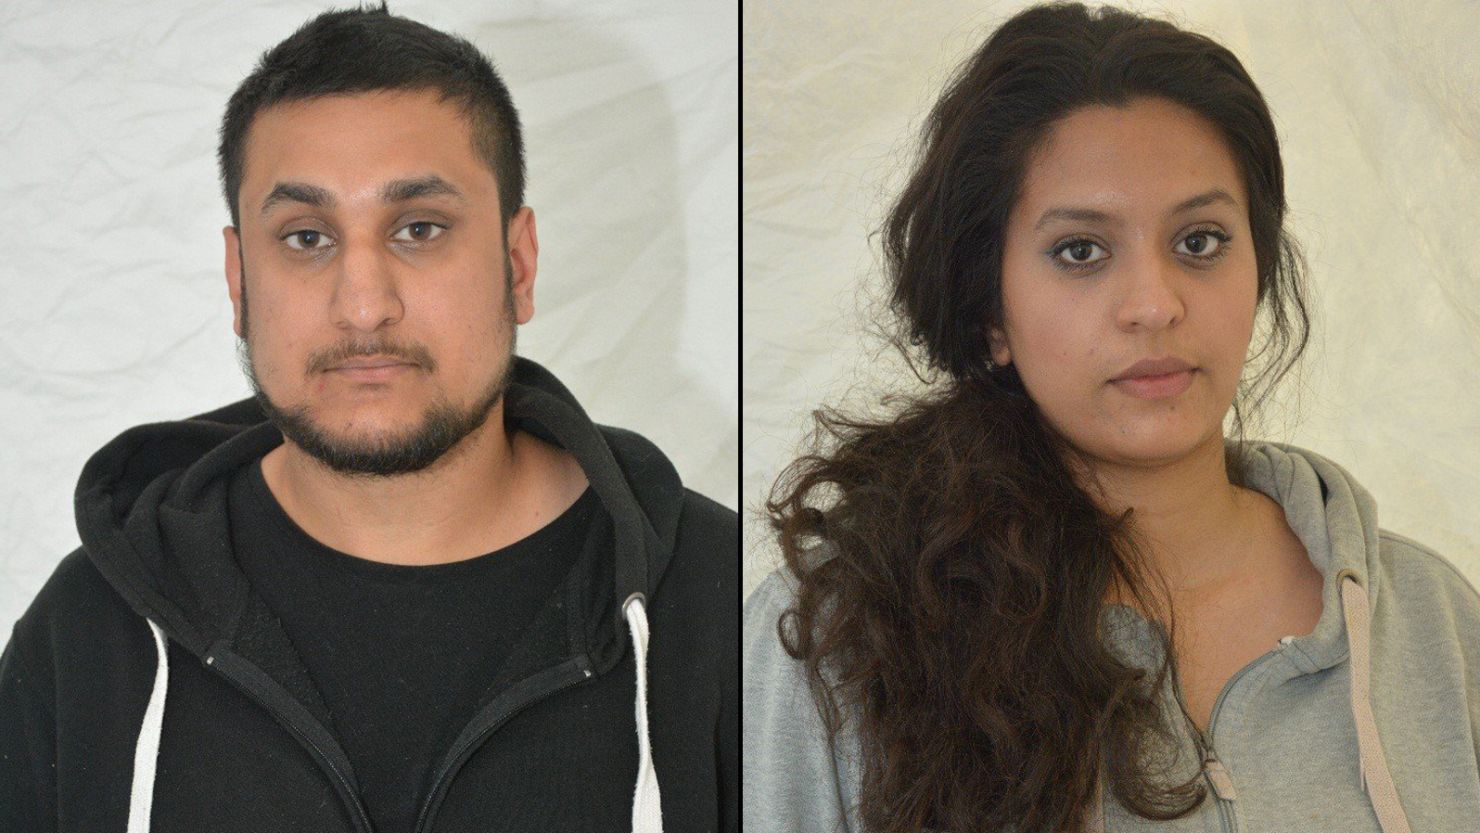 Mohammed Rehman, left, and Sana Ahmed Khan were convicted in a British court Tuesday.